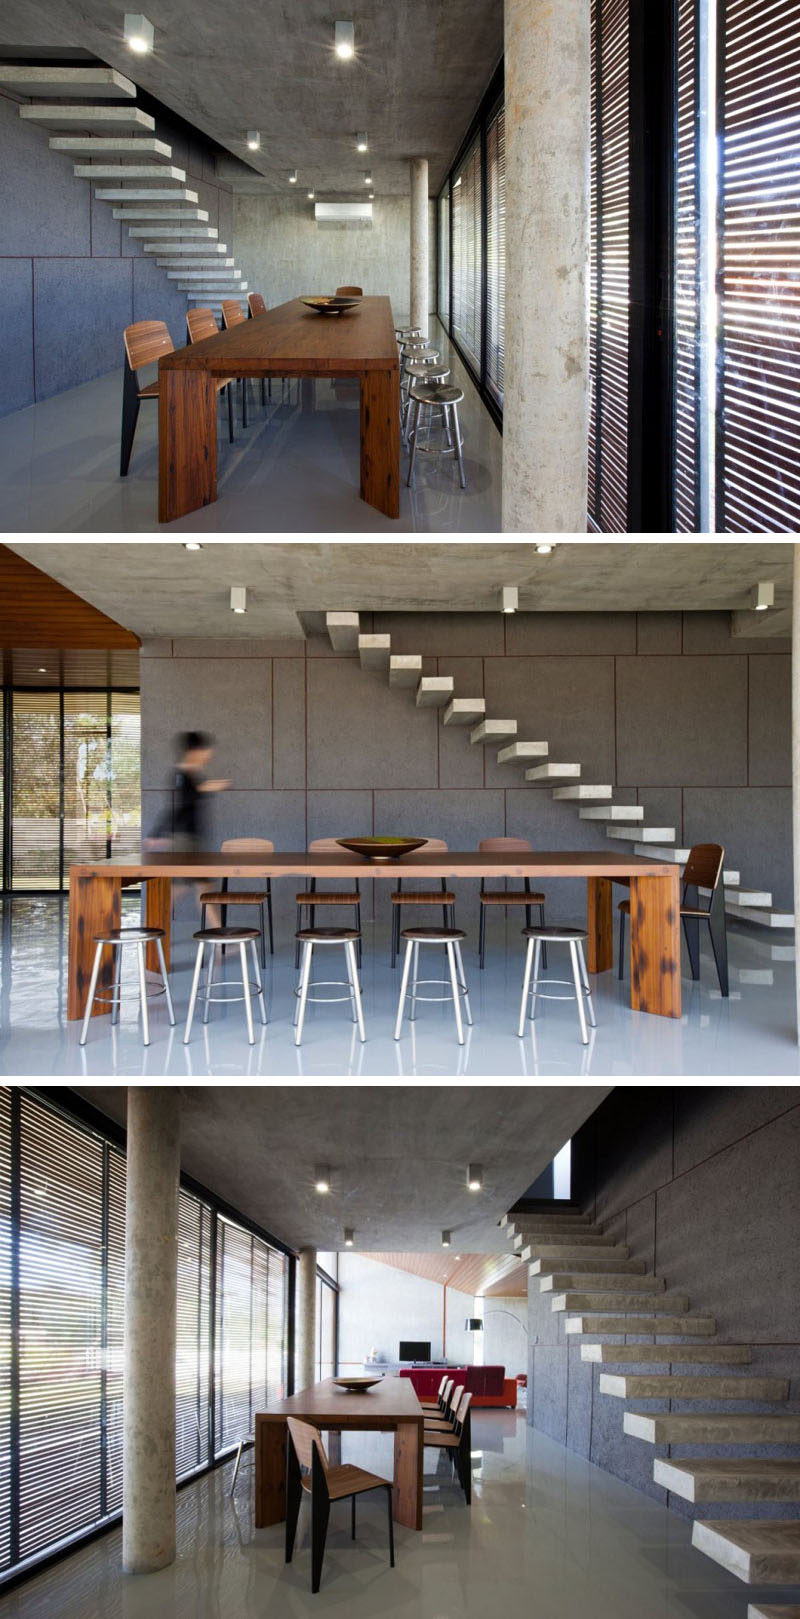 A large wooden dining table and chairs warm up the mostly-concrete interior of this home.